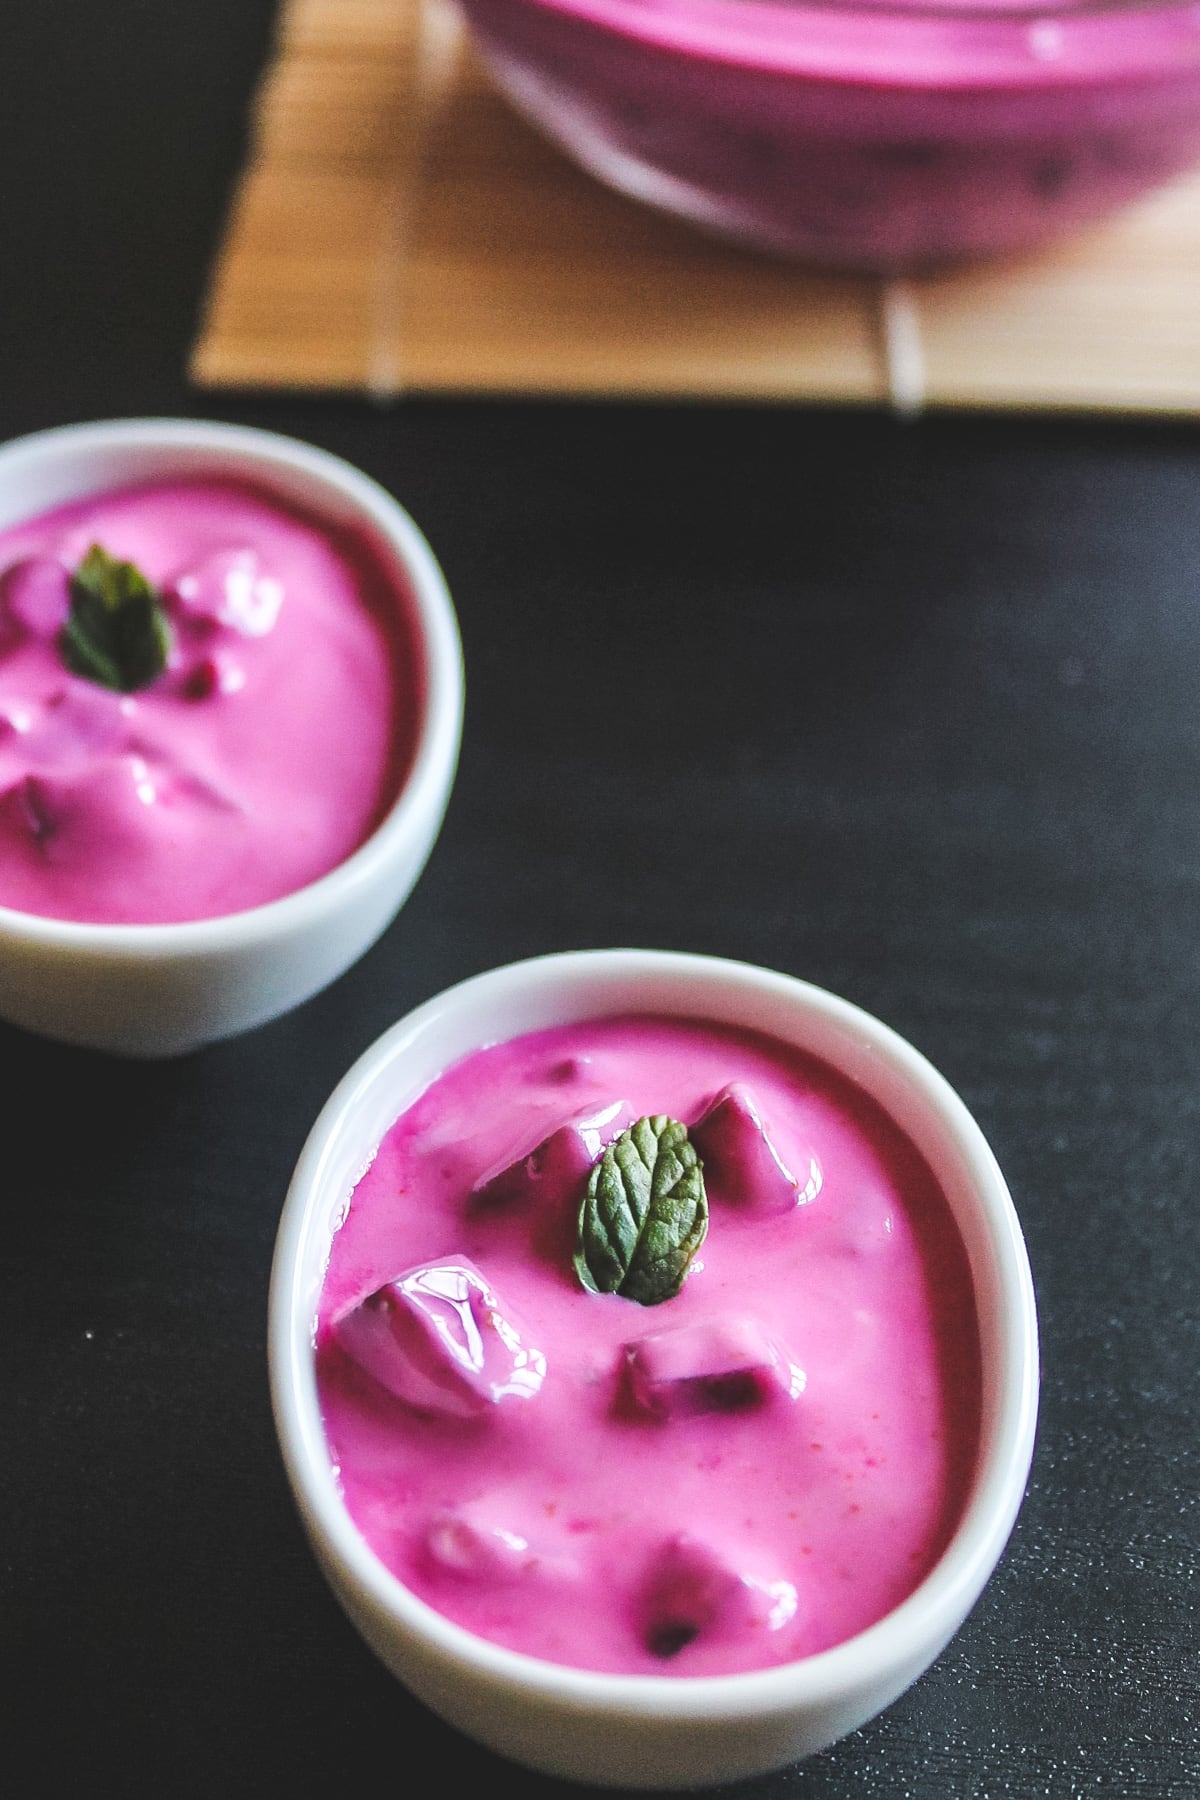 2 small bowls of beetroot raita garnished with mint leaves.